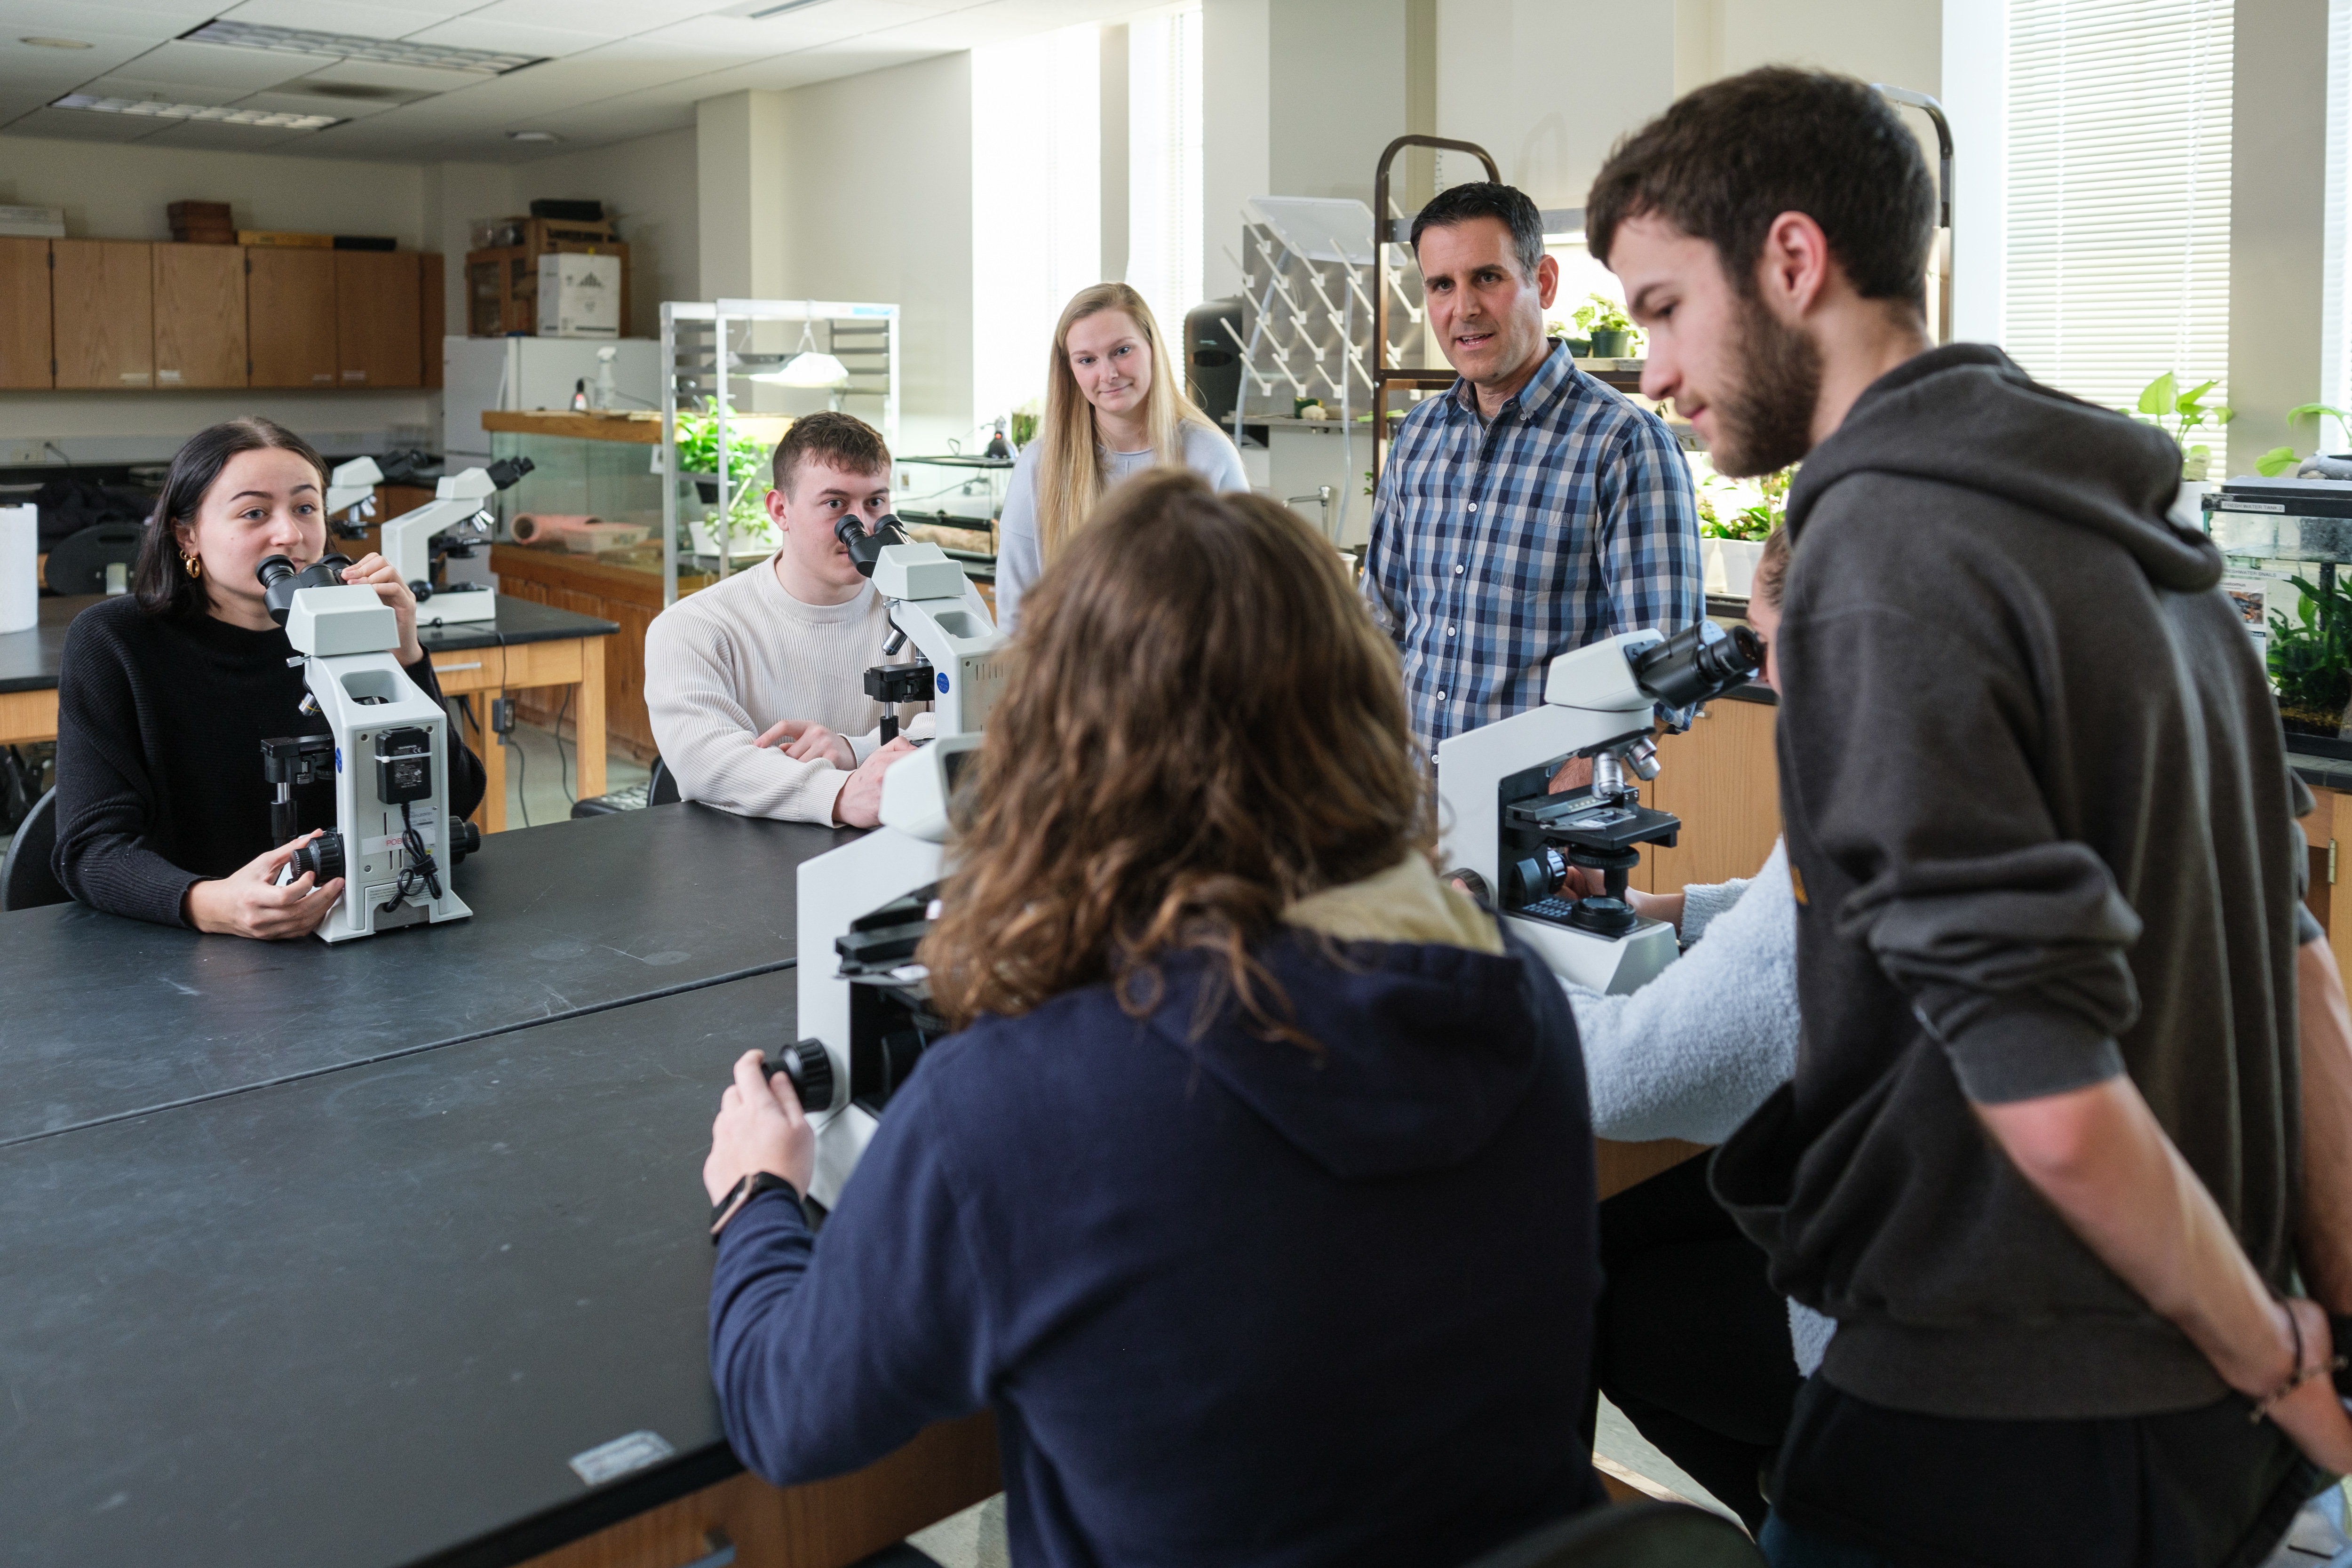 Students and science professor using microscopes